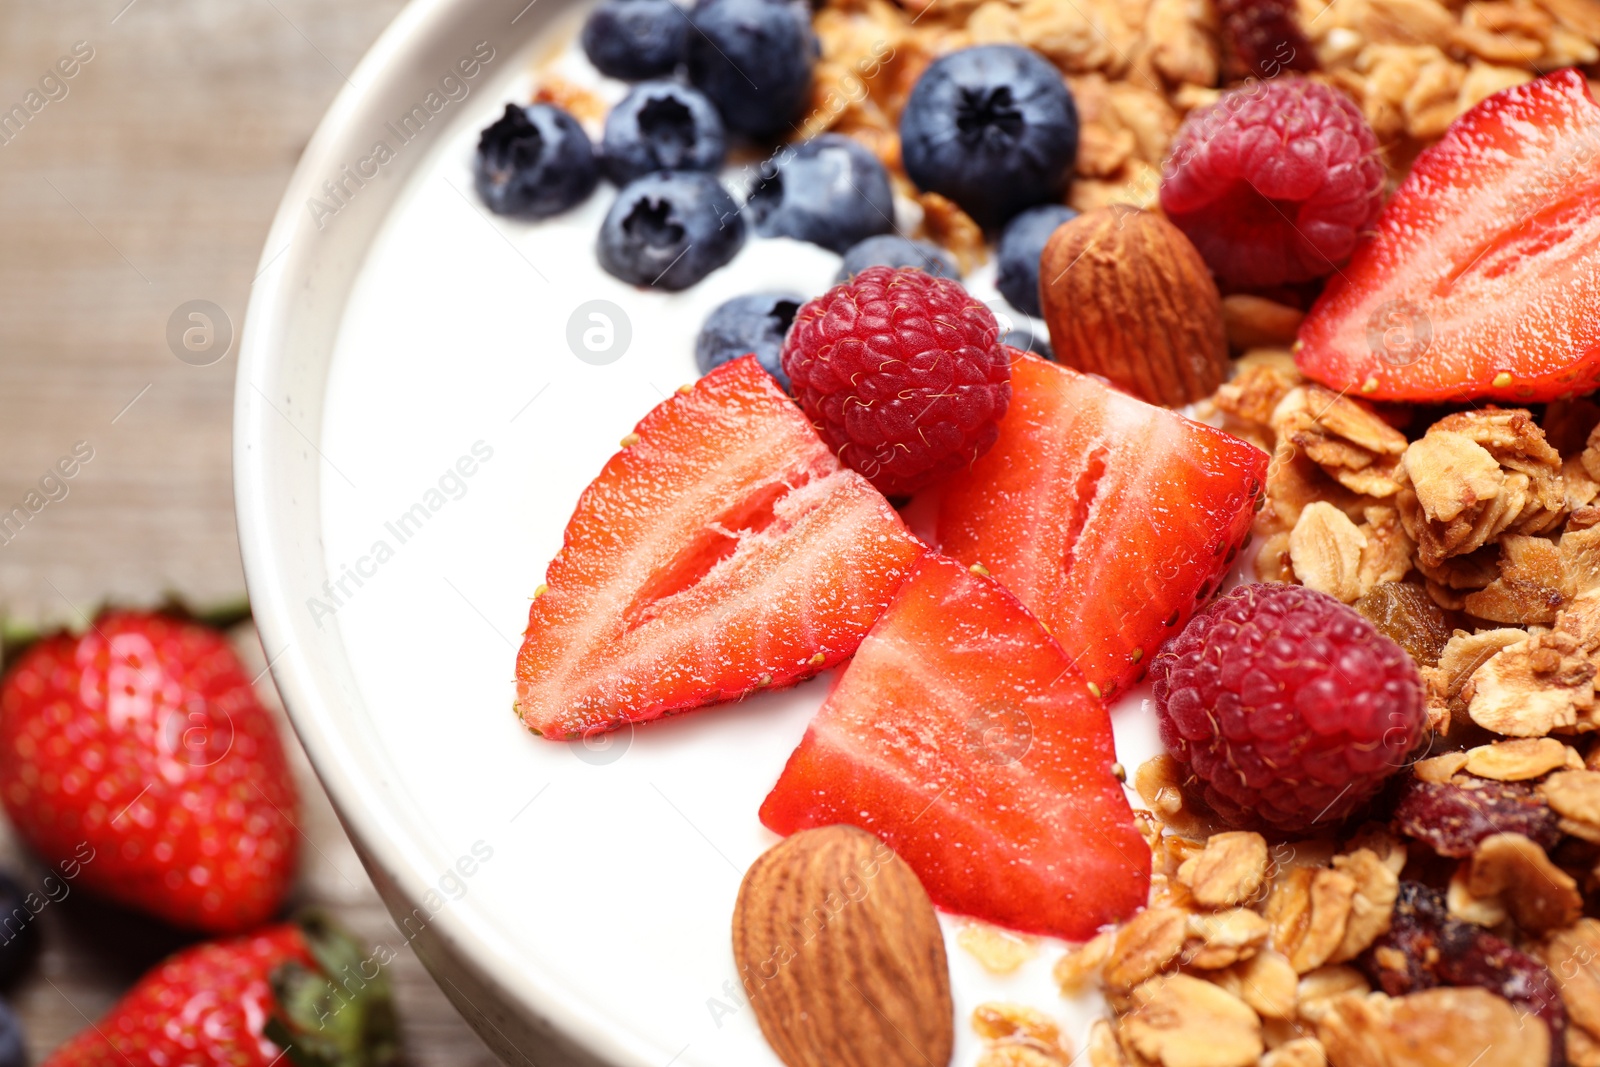 Photo of Tasty homemade granola served on wooden table, closeup. Healthy breakfast